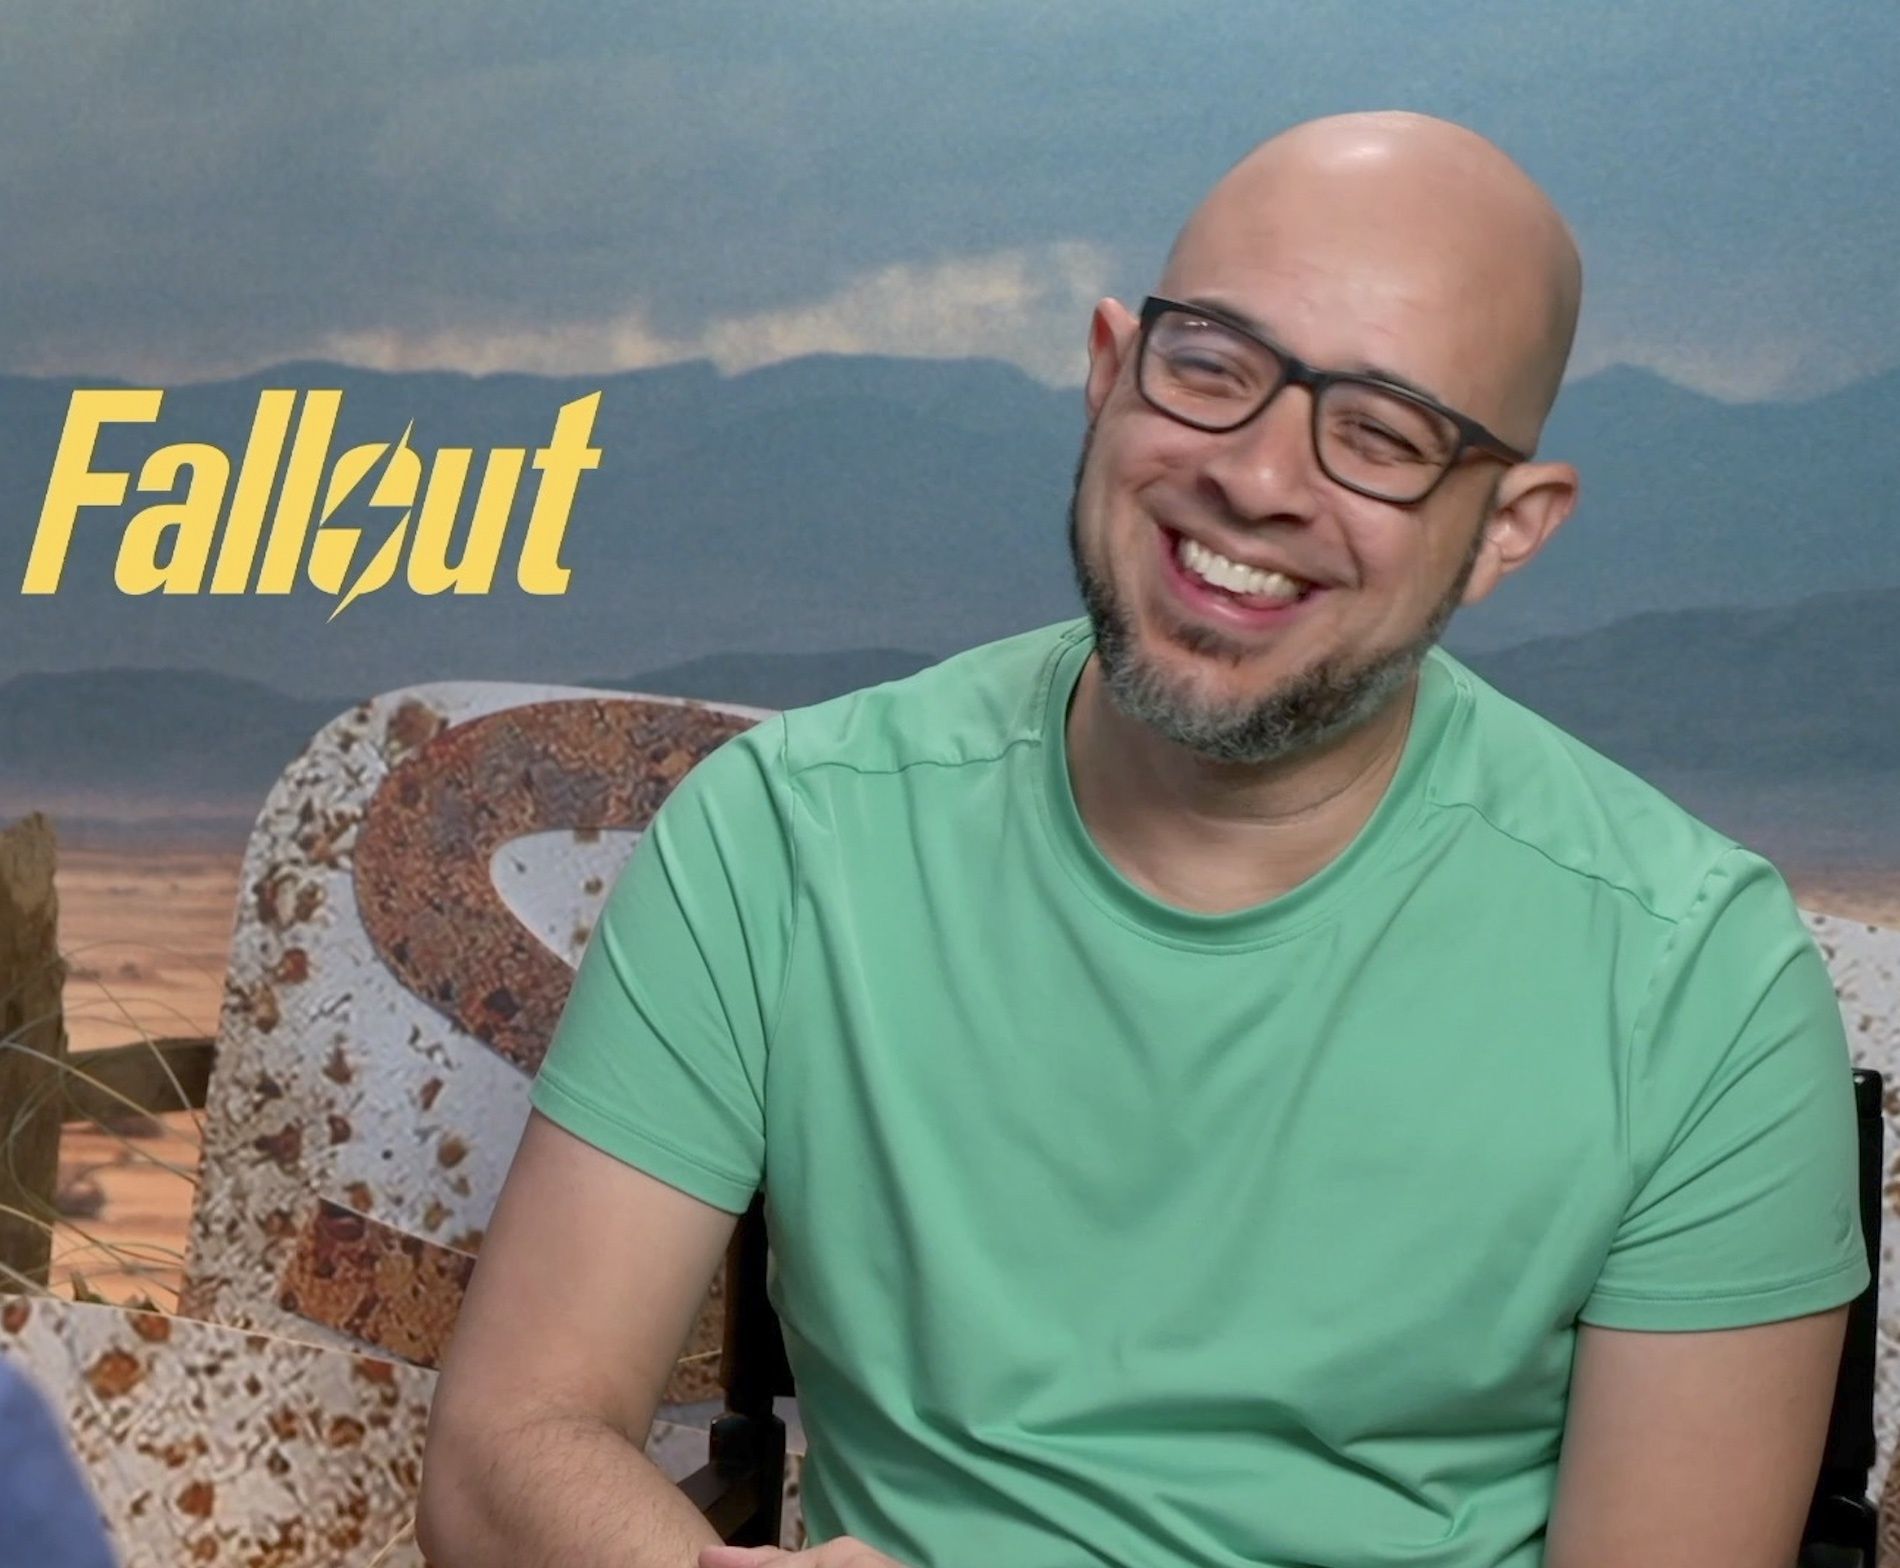 S19 Ep1336: Fallout TV Series - Interviews with Cast and Crew